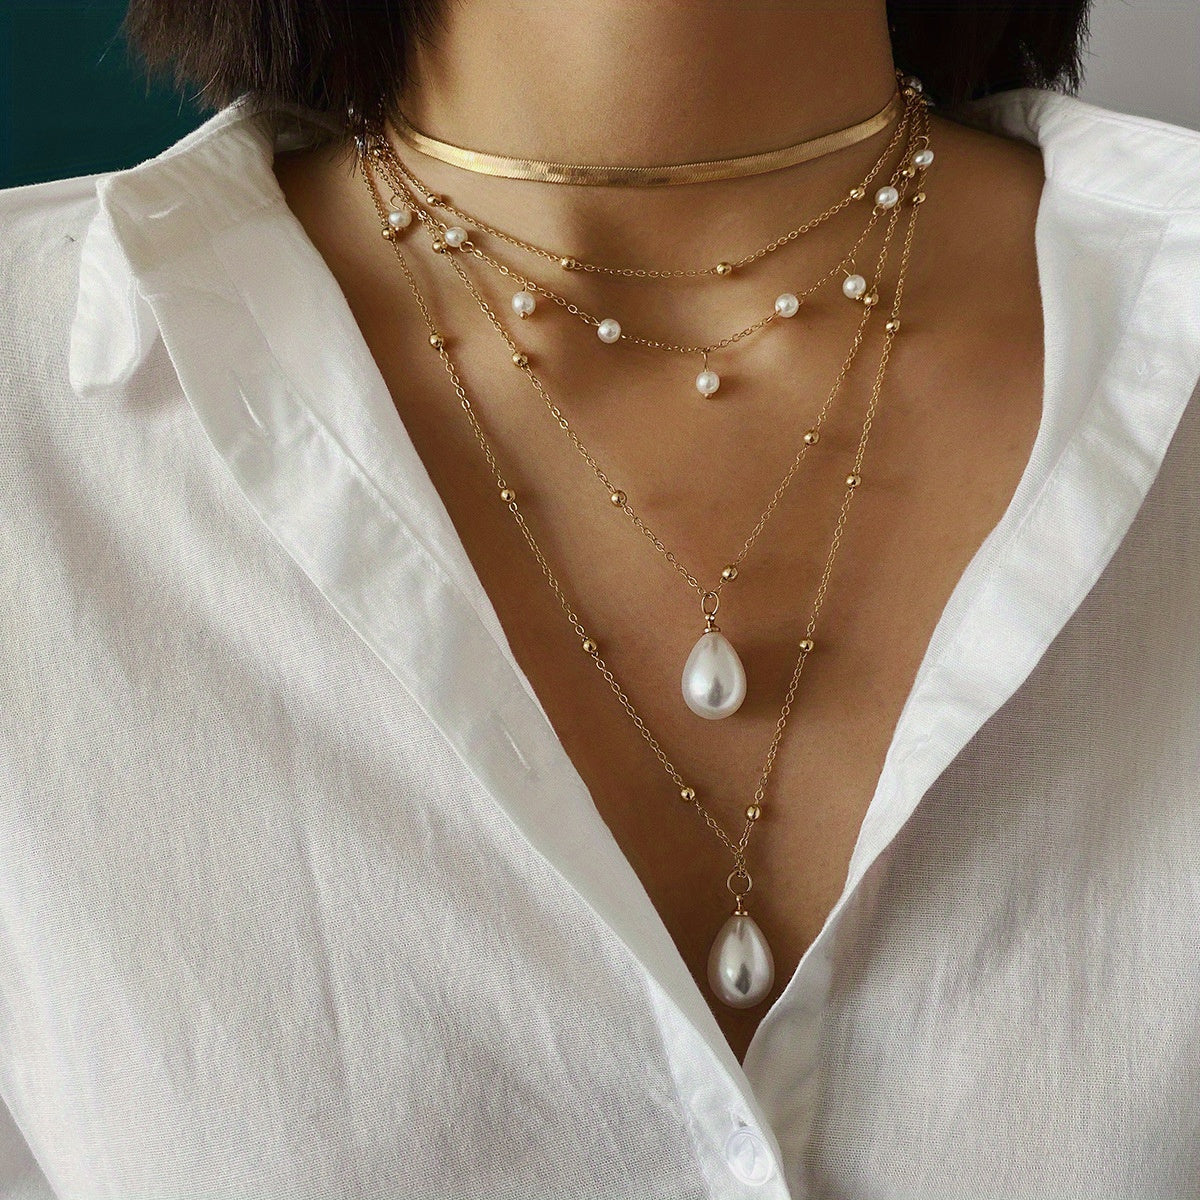 2pcs Multilayer Tassel Faux Pearl Copper Bead Flat Snake Chain Set Necklace